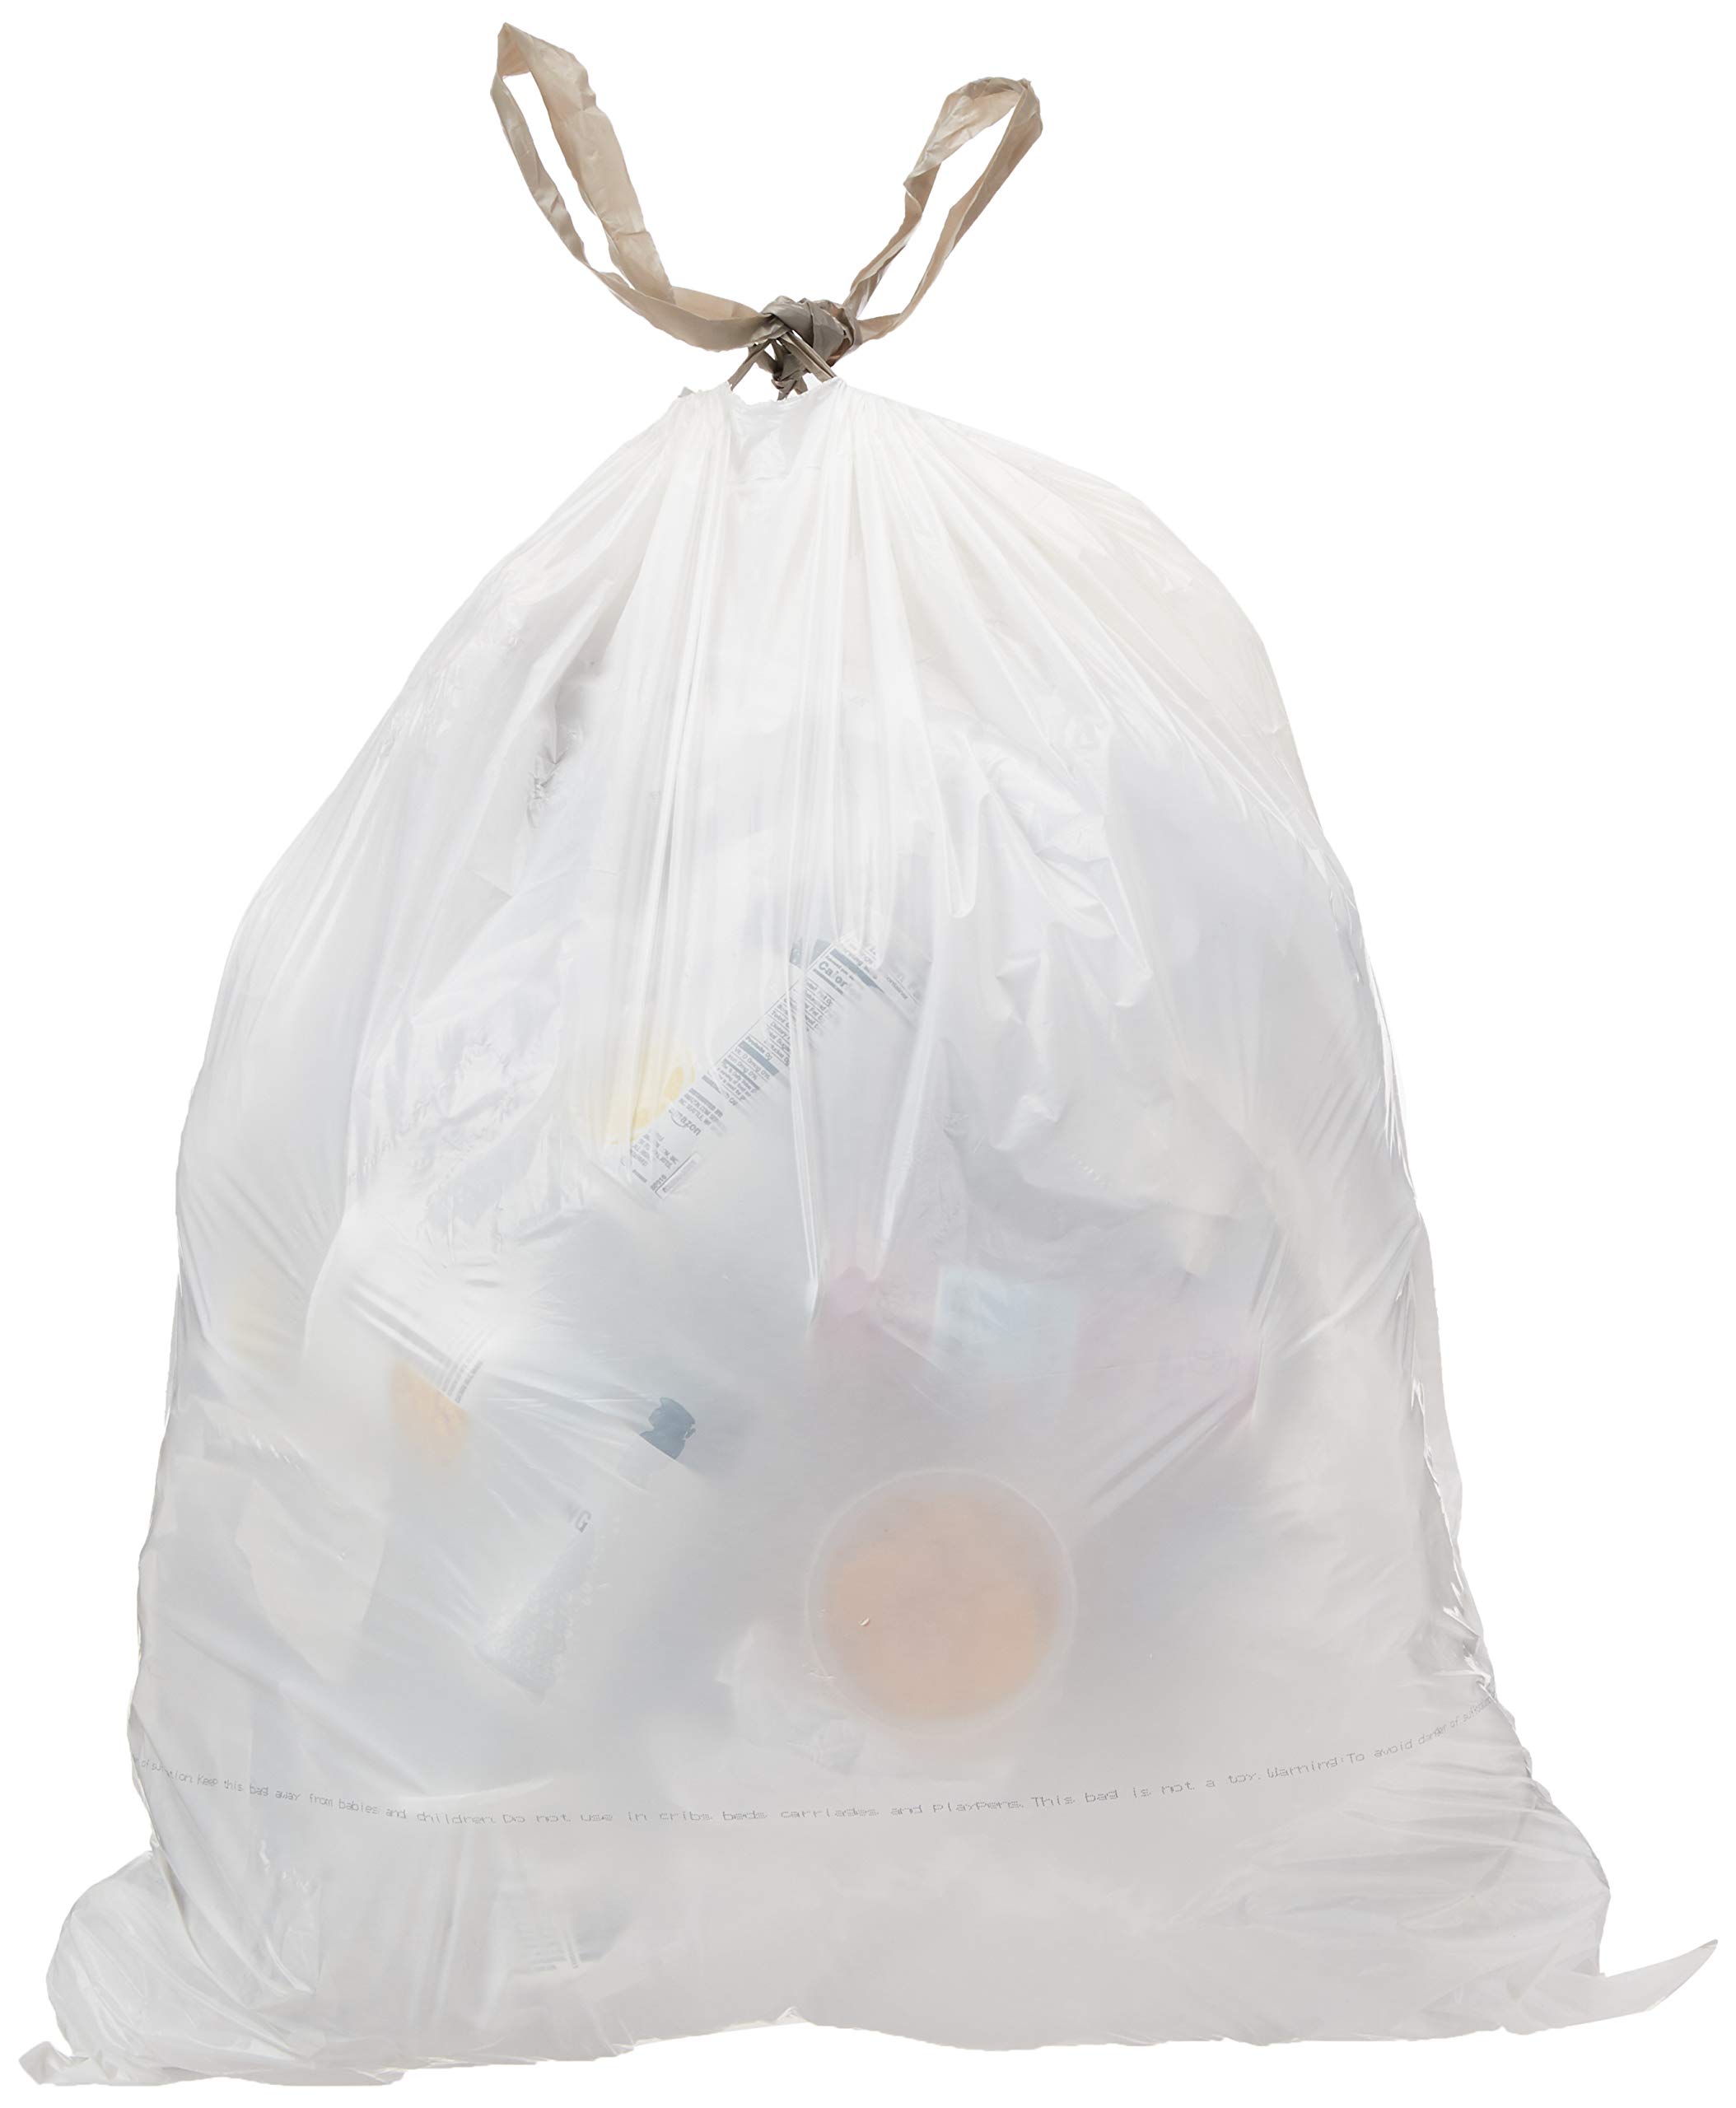 Commercial 18 Gallon Trash Compactor Bags /w Drawstrings - 2